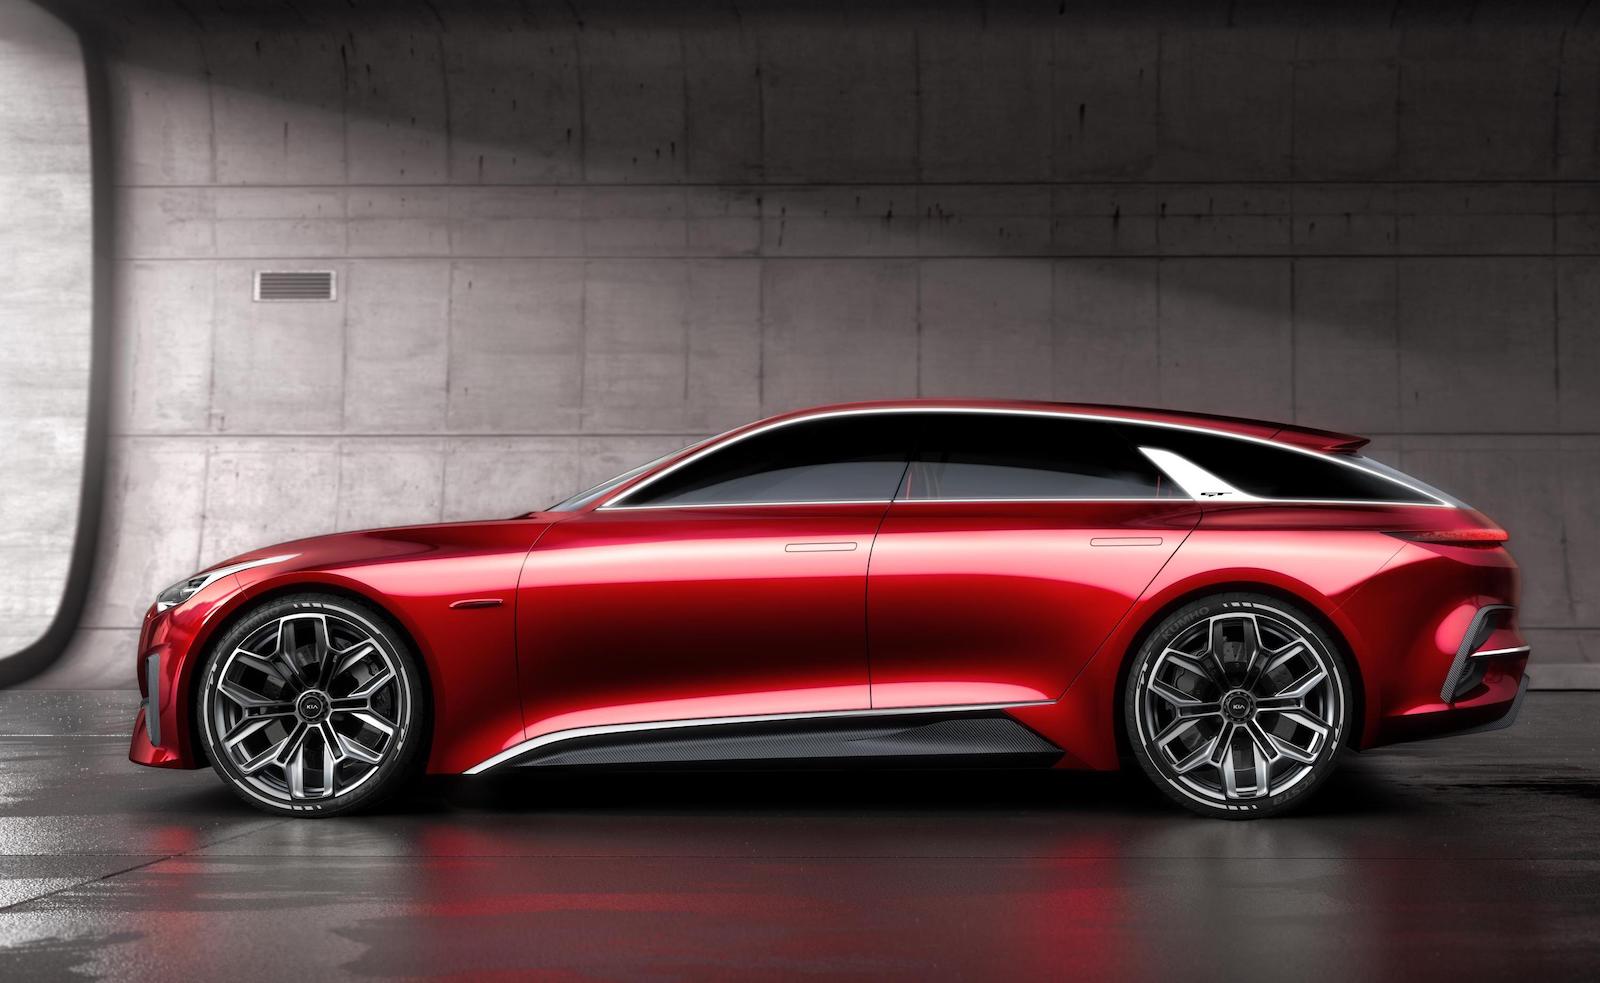 Jaw-dropping Kia Proceed Concept revealed